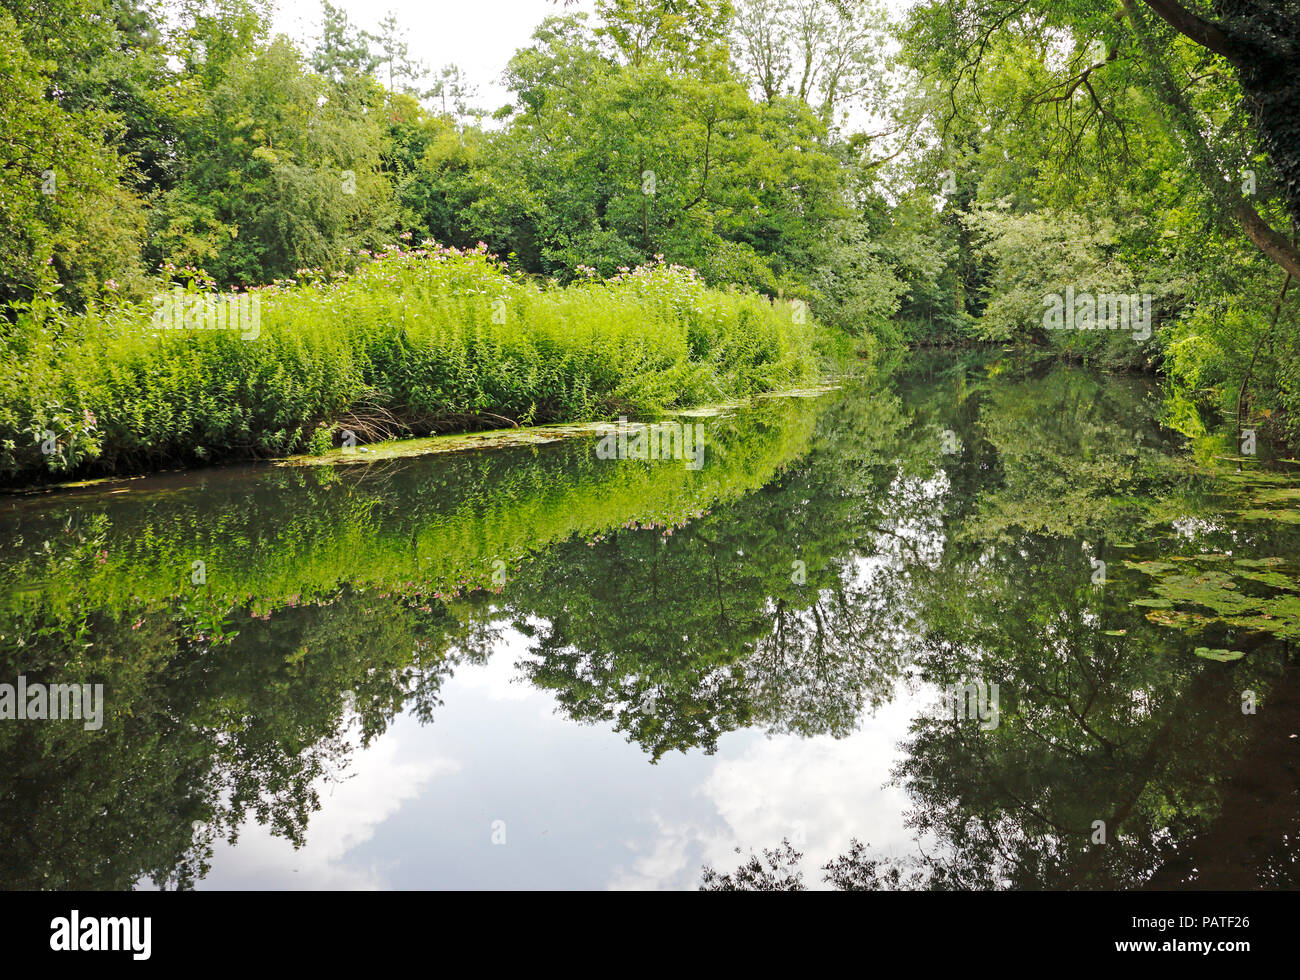 A view of the River Wensum with symmetrical reflections downstream of Hellesdon Road Bridge, Hellesdon, Norfolk, England, United Kingdom, Europe. Stock Photo